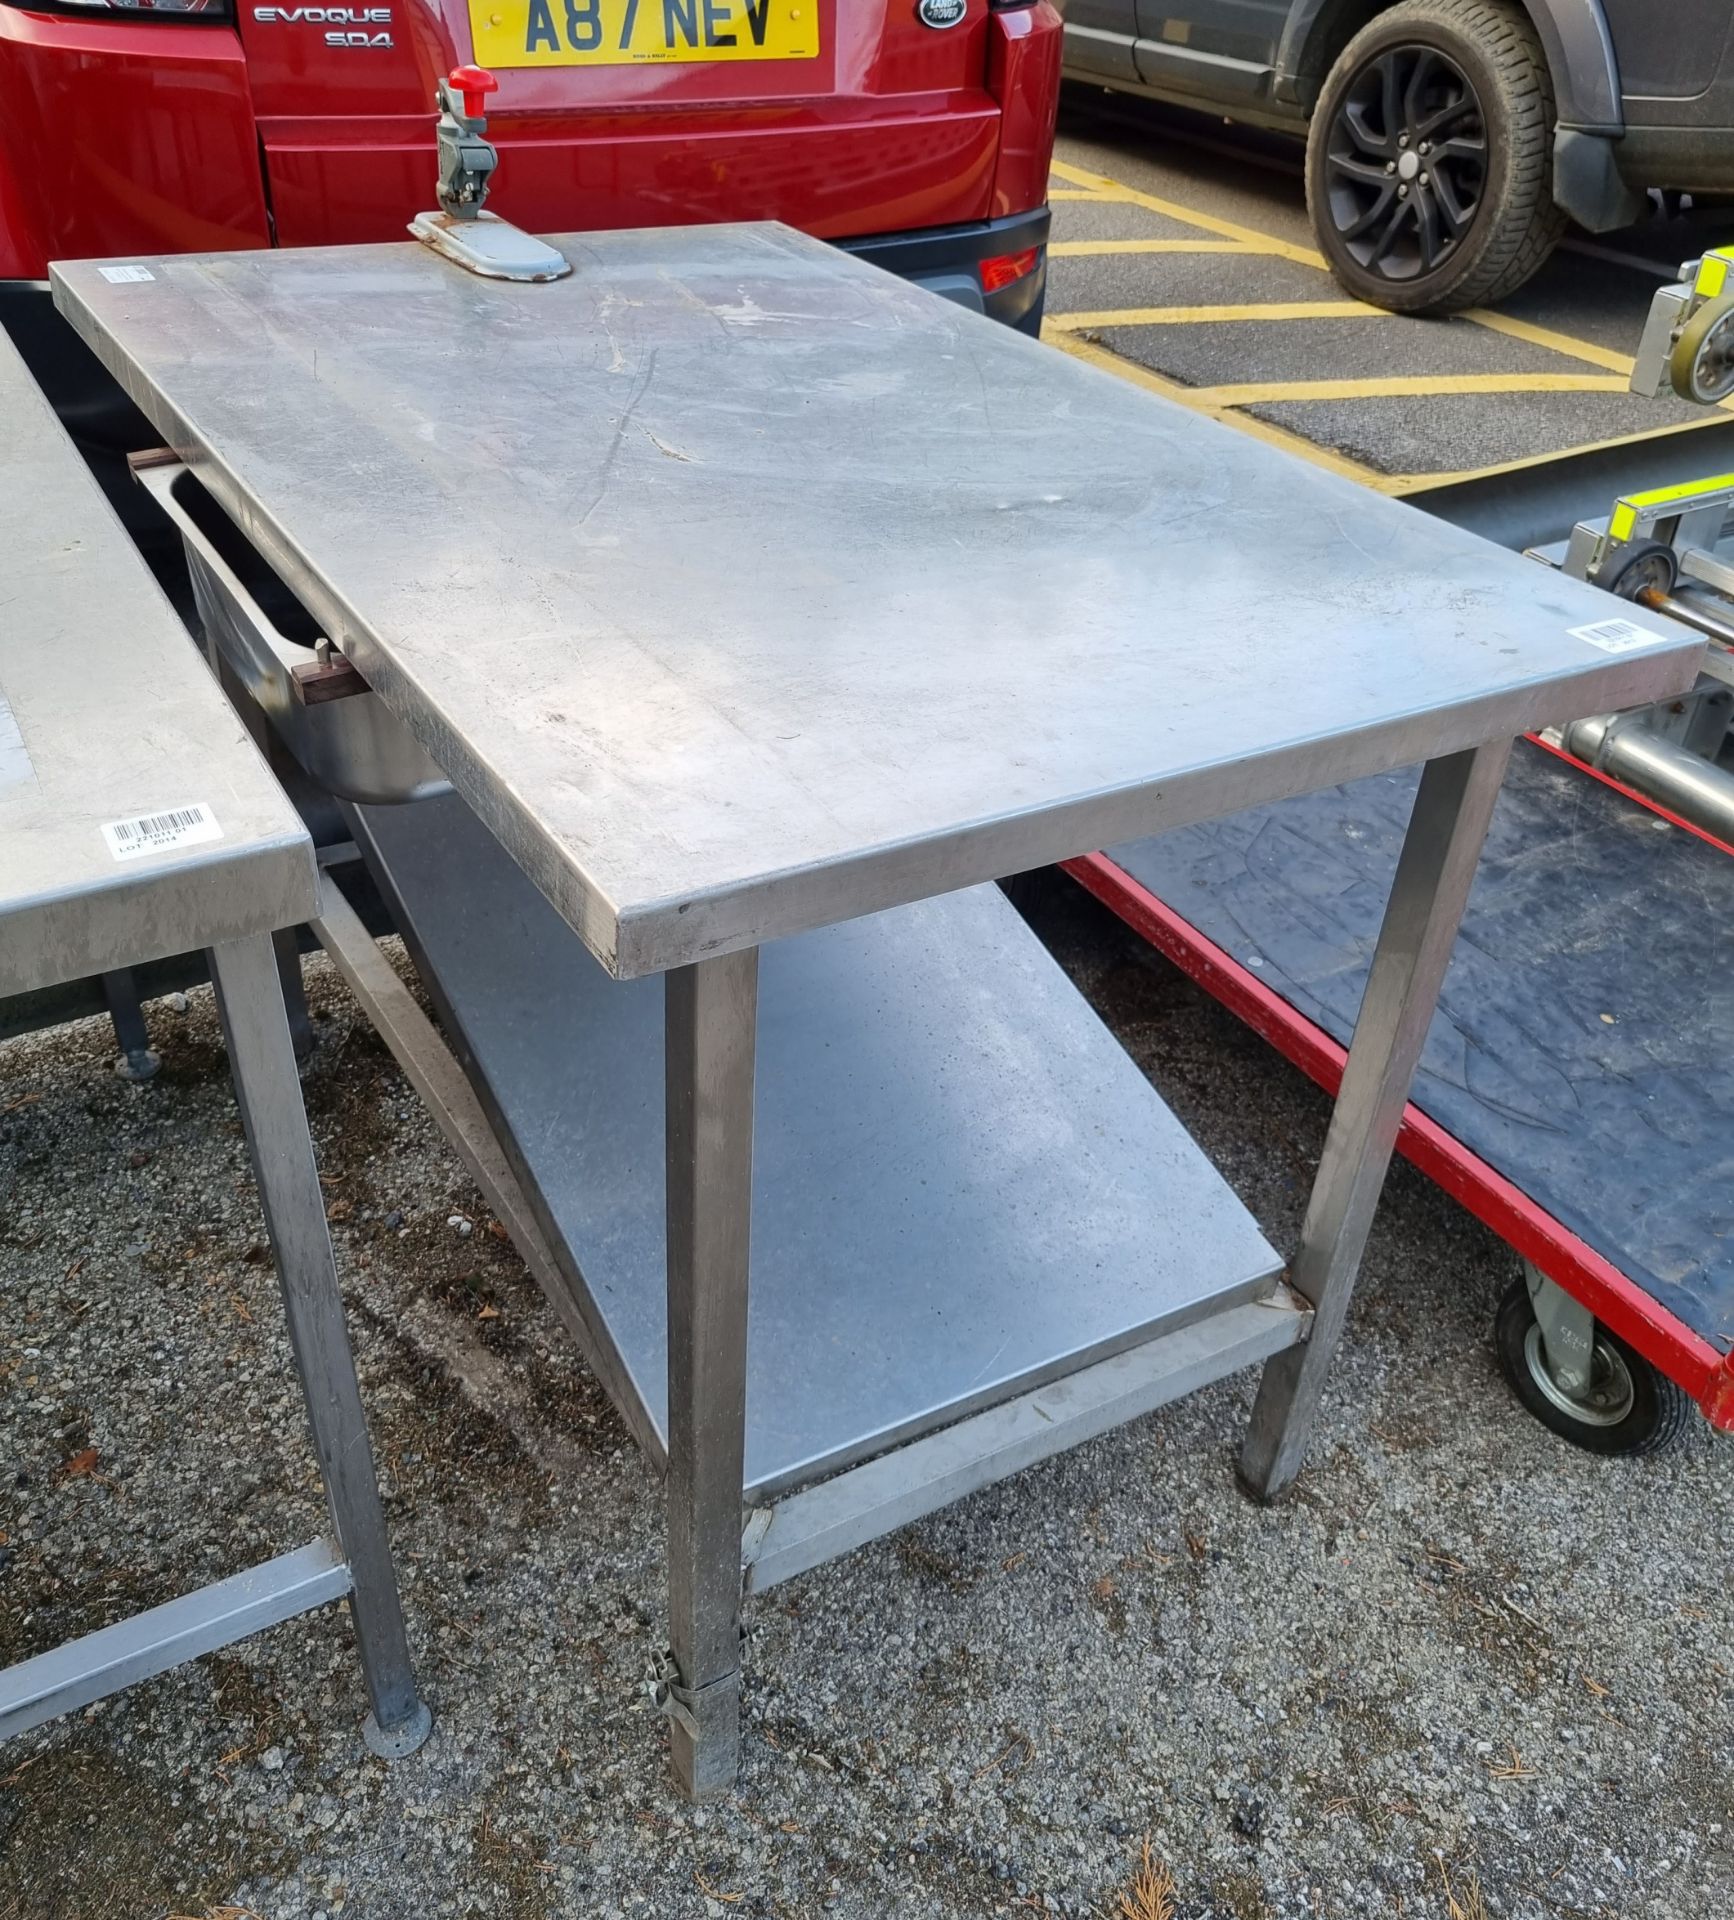 Stainless steel preparation table with drawer and shelf - 120x75x85cm - Image 2 of 3